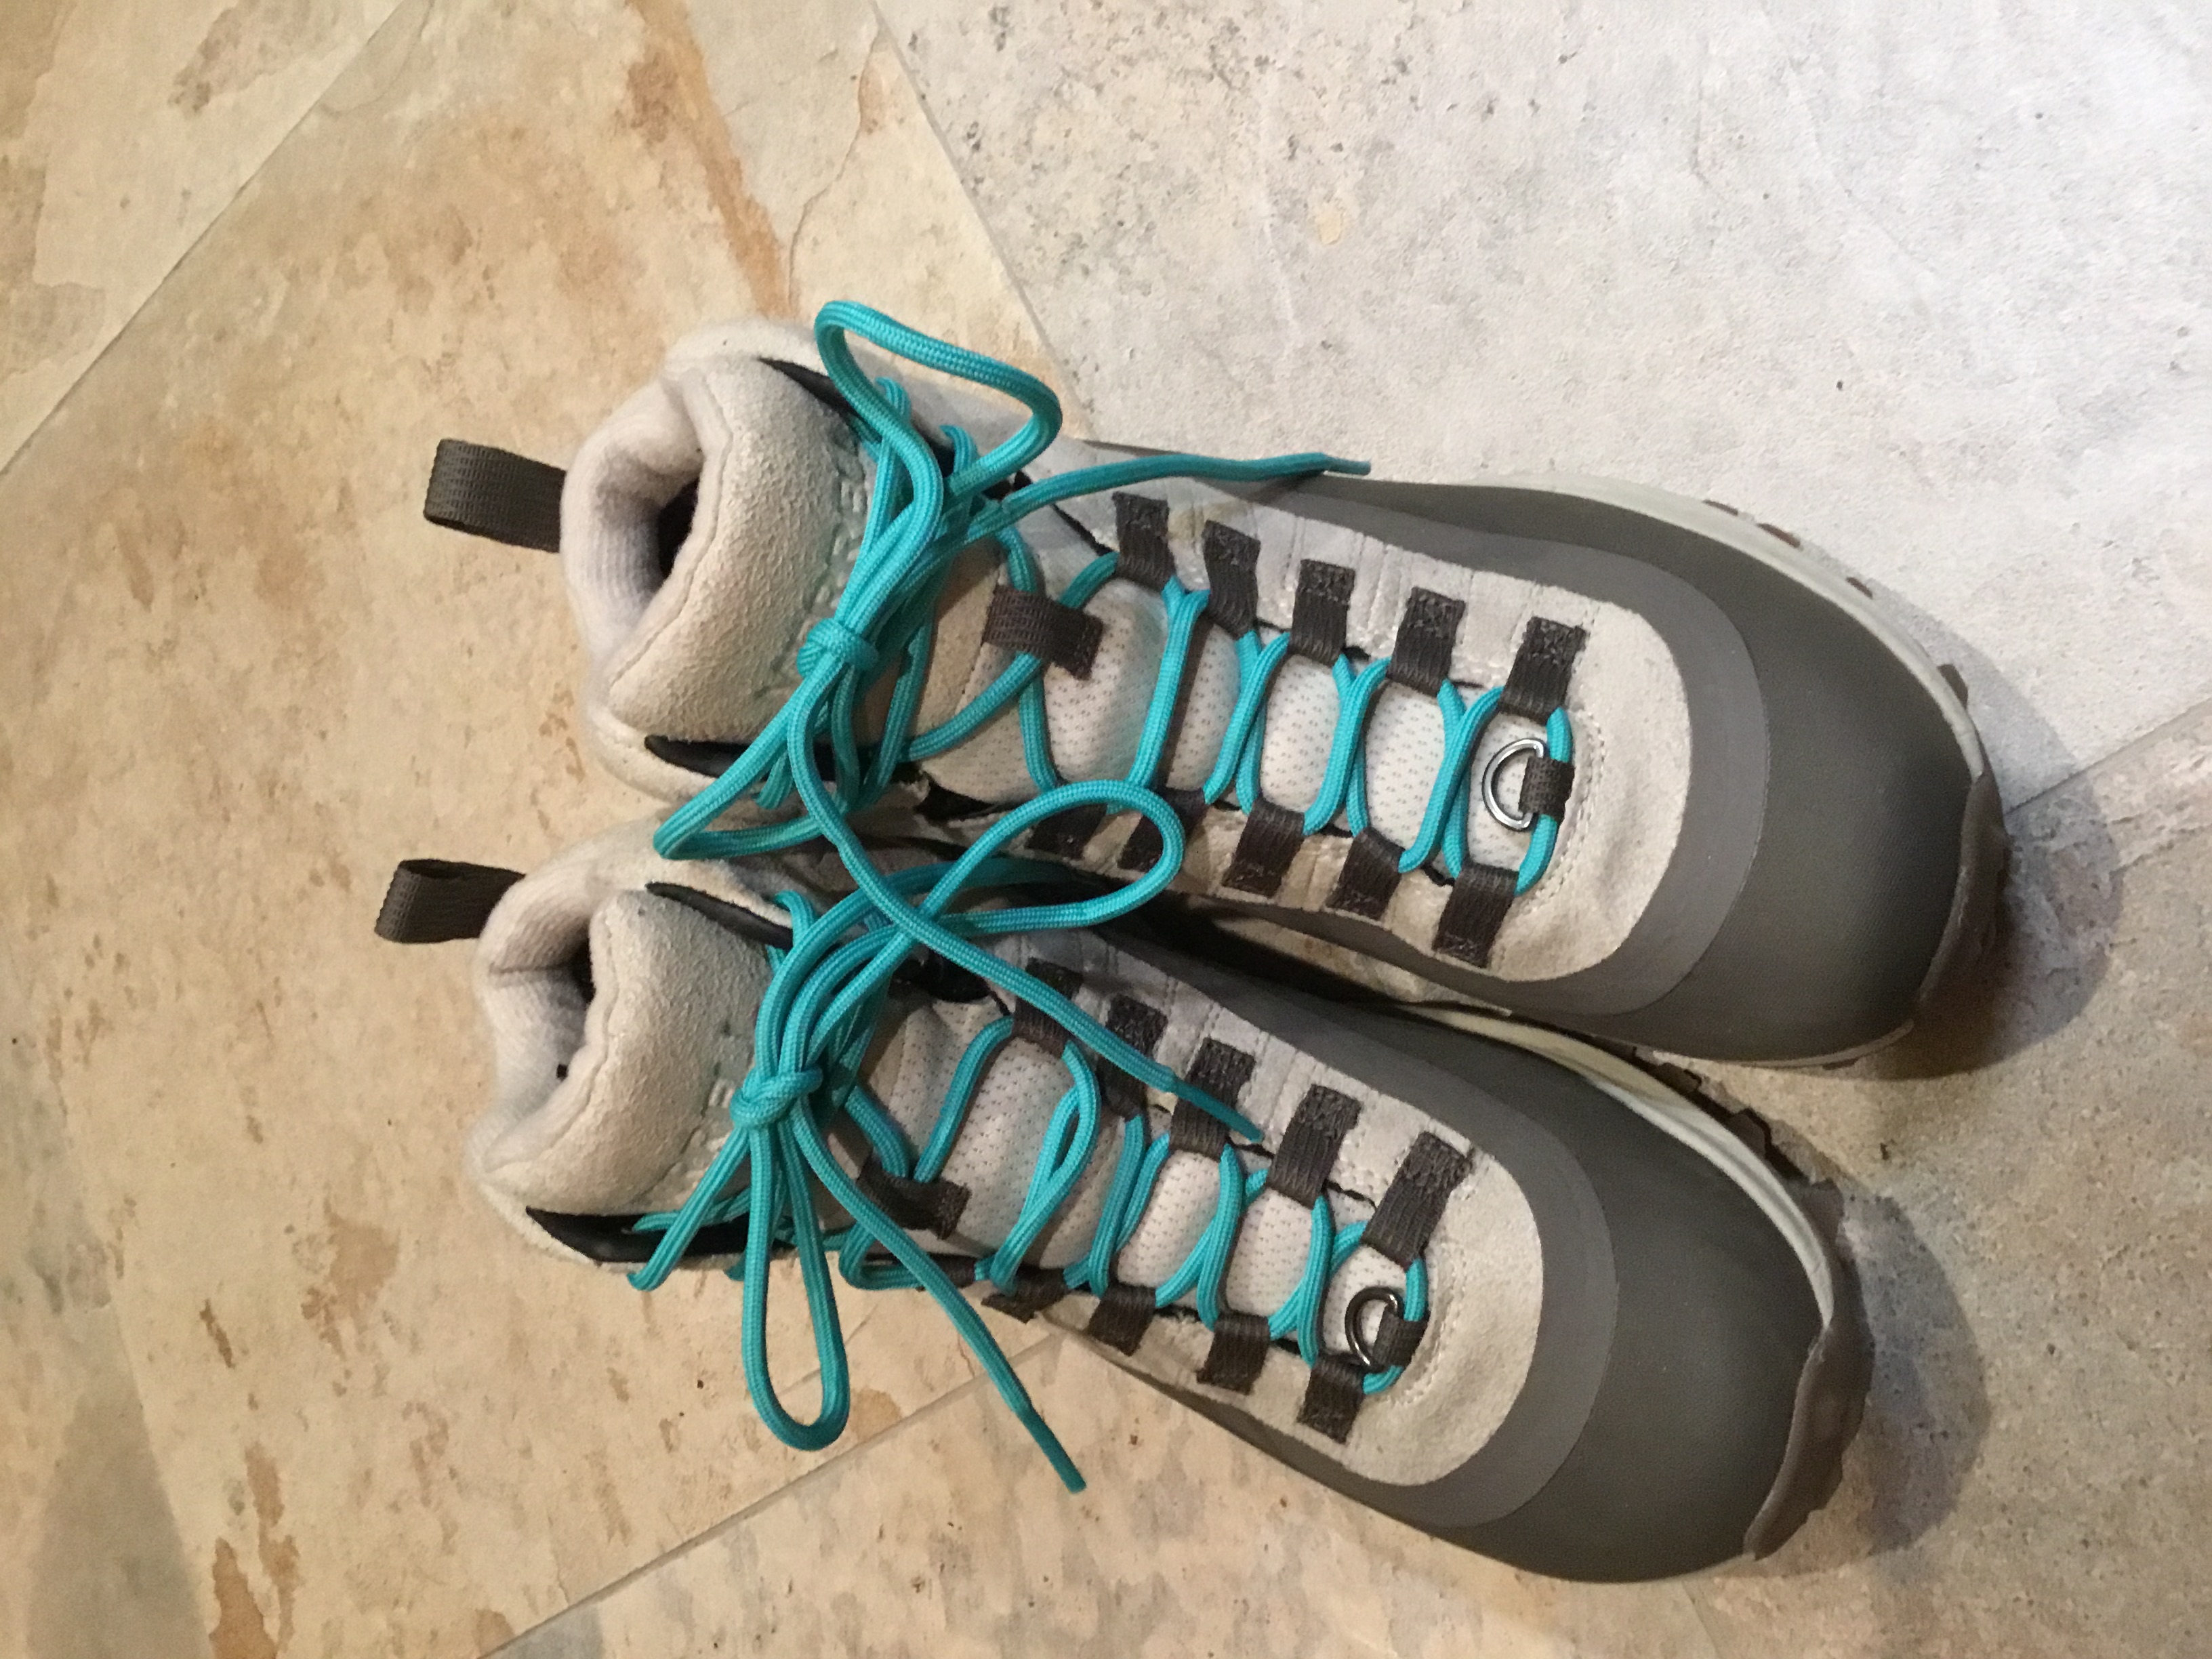 merrell hiking shoe laces